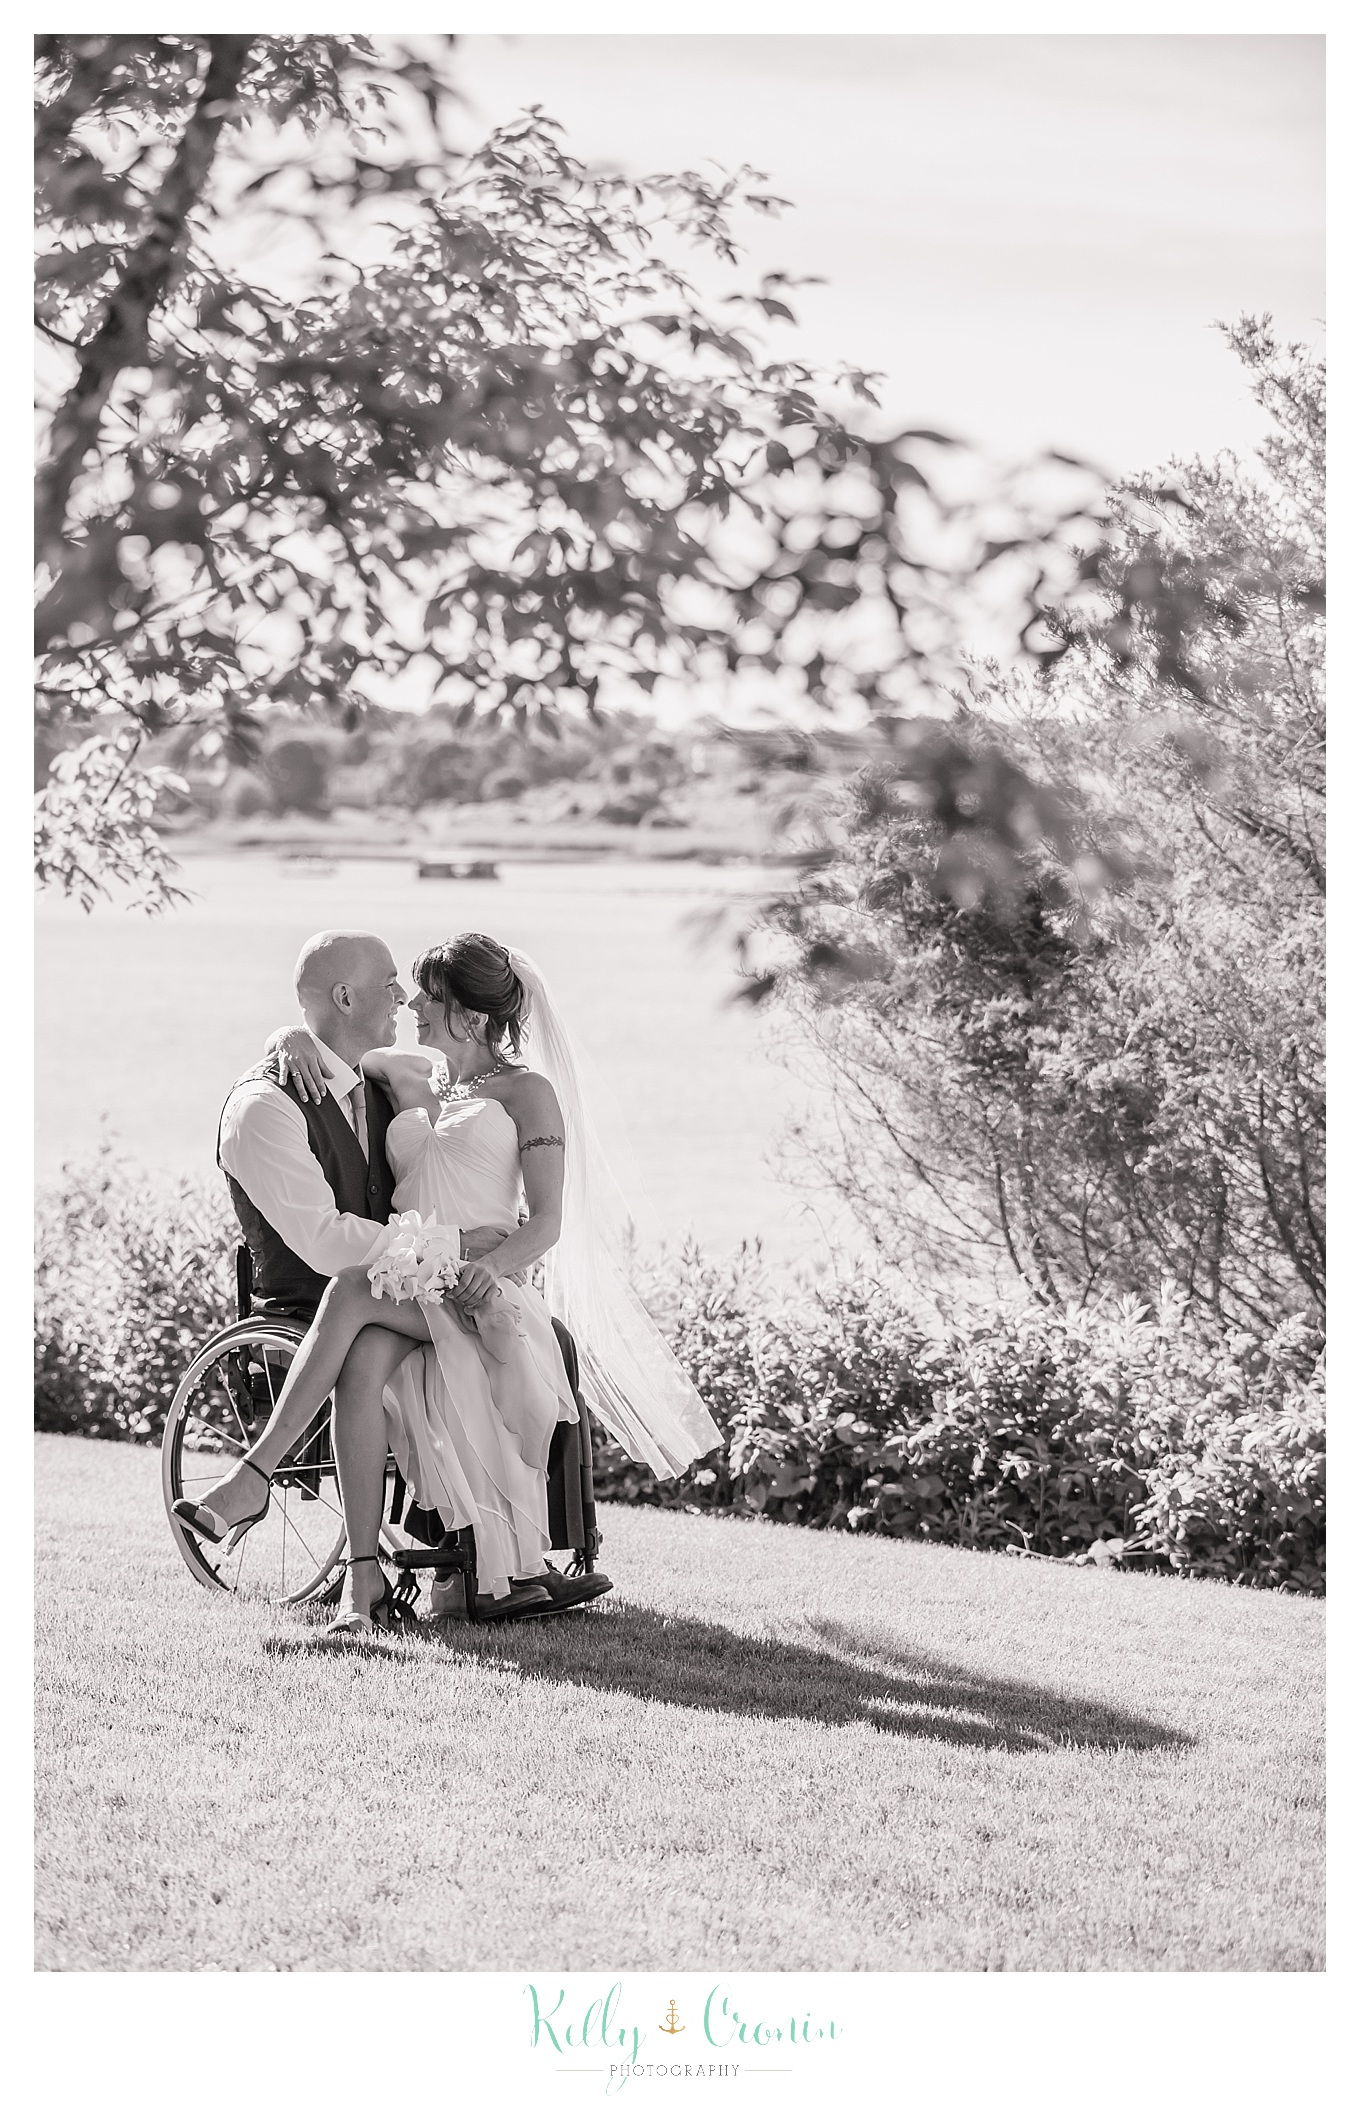 A newlywed couple share an intimate moment | Kelly Cronin Photography | Chatham Wedding Photographer